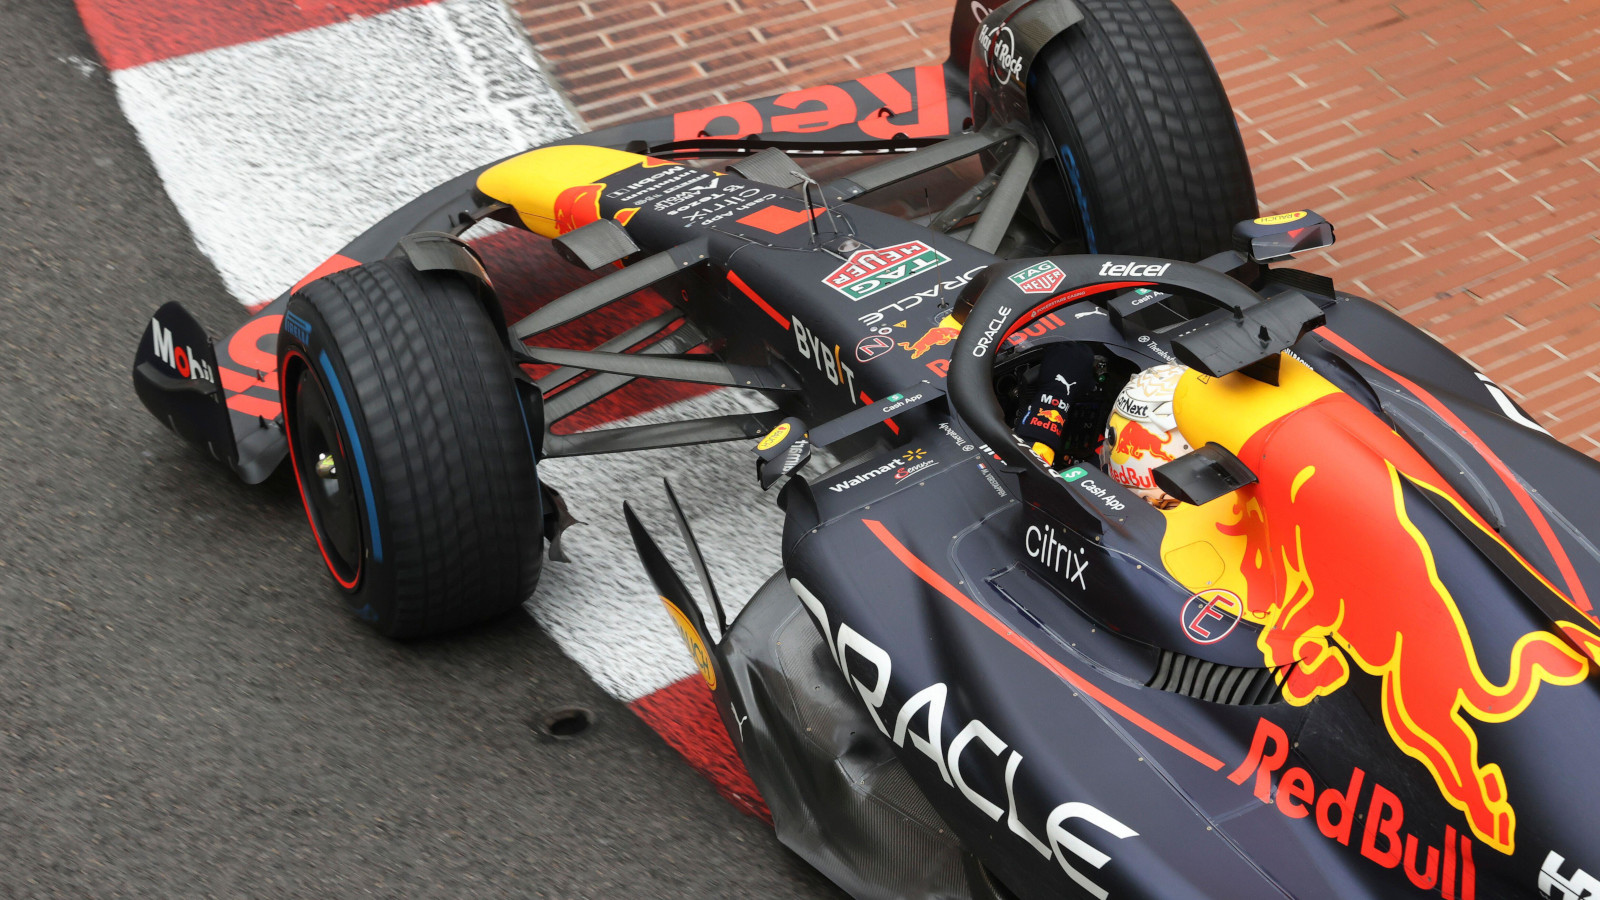 Max Verstappen on full wet tyres corners over the kerb in his Red Bull. Monaco May 2022